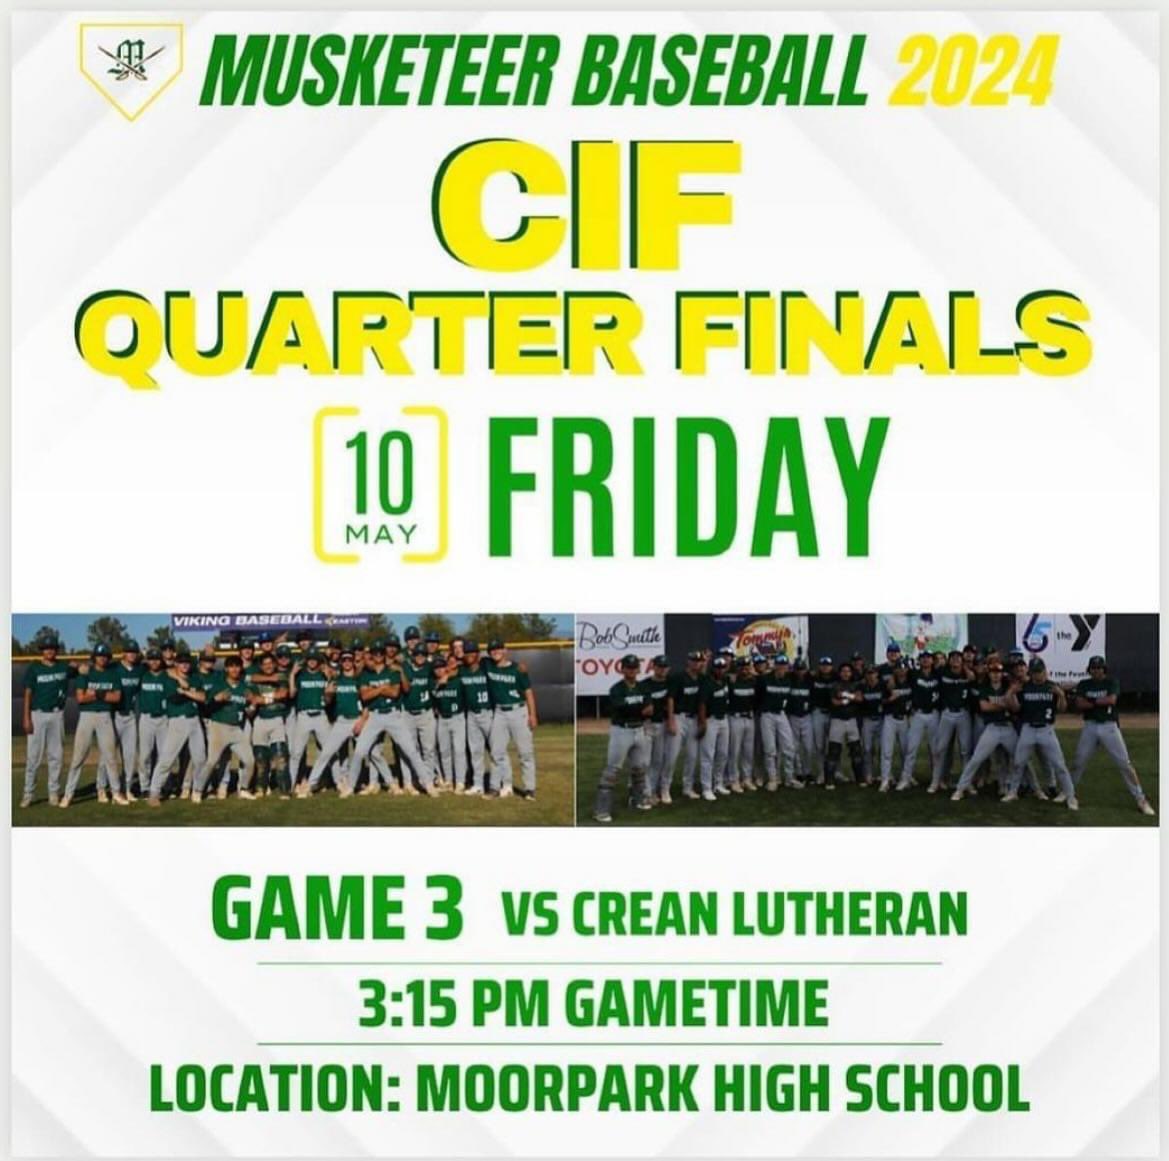 Count down to quarter finals is on. Today-Come on out, fill up the stands, and cheer on our Boys with us! Let’s Go MOORPARK! 💚💛⚾️